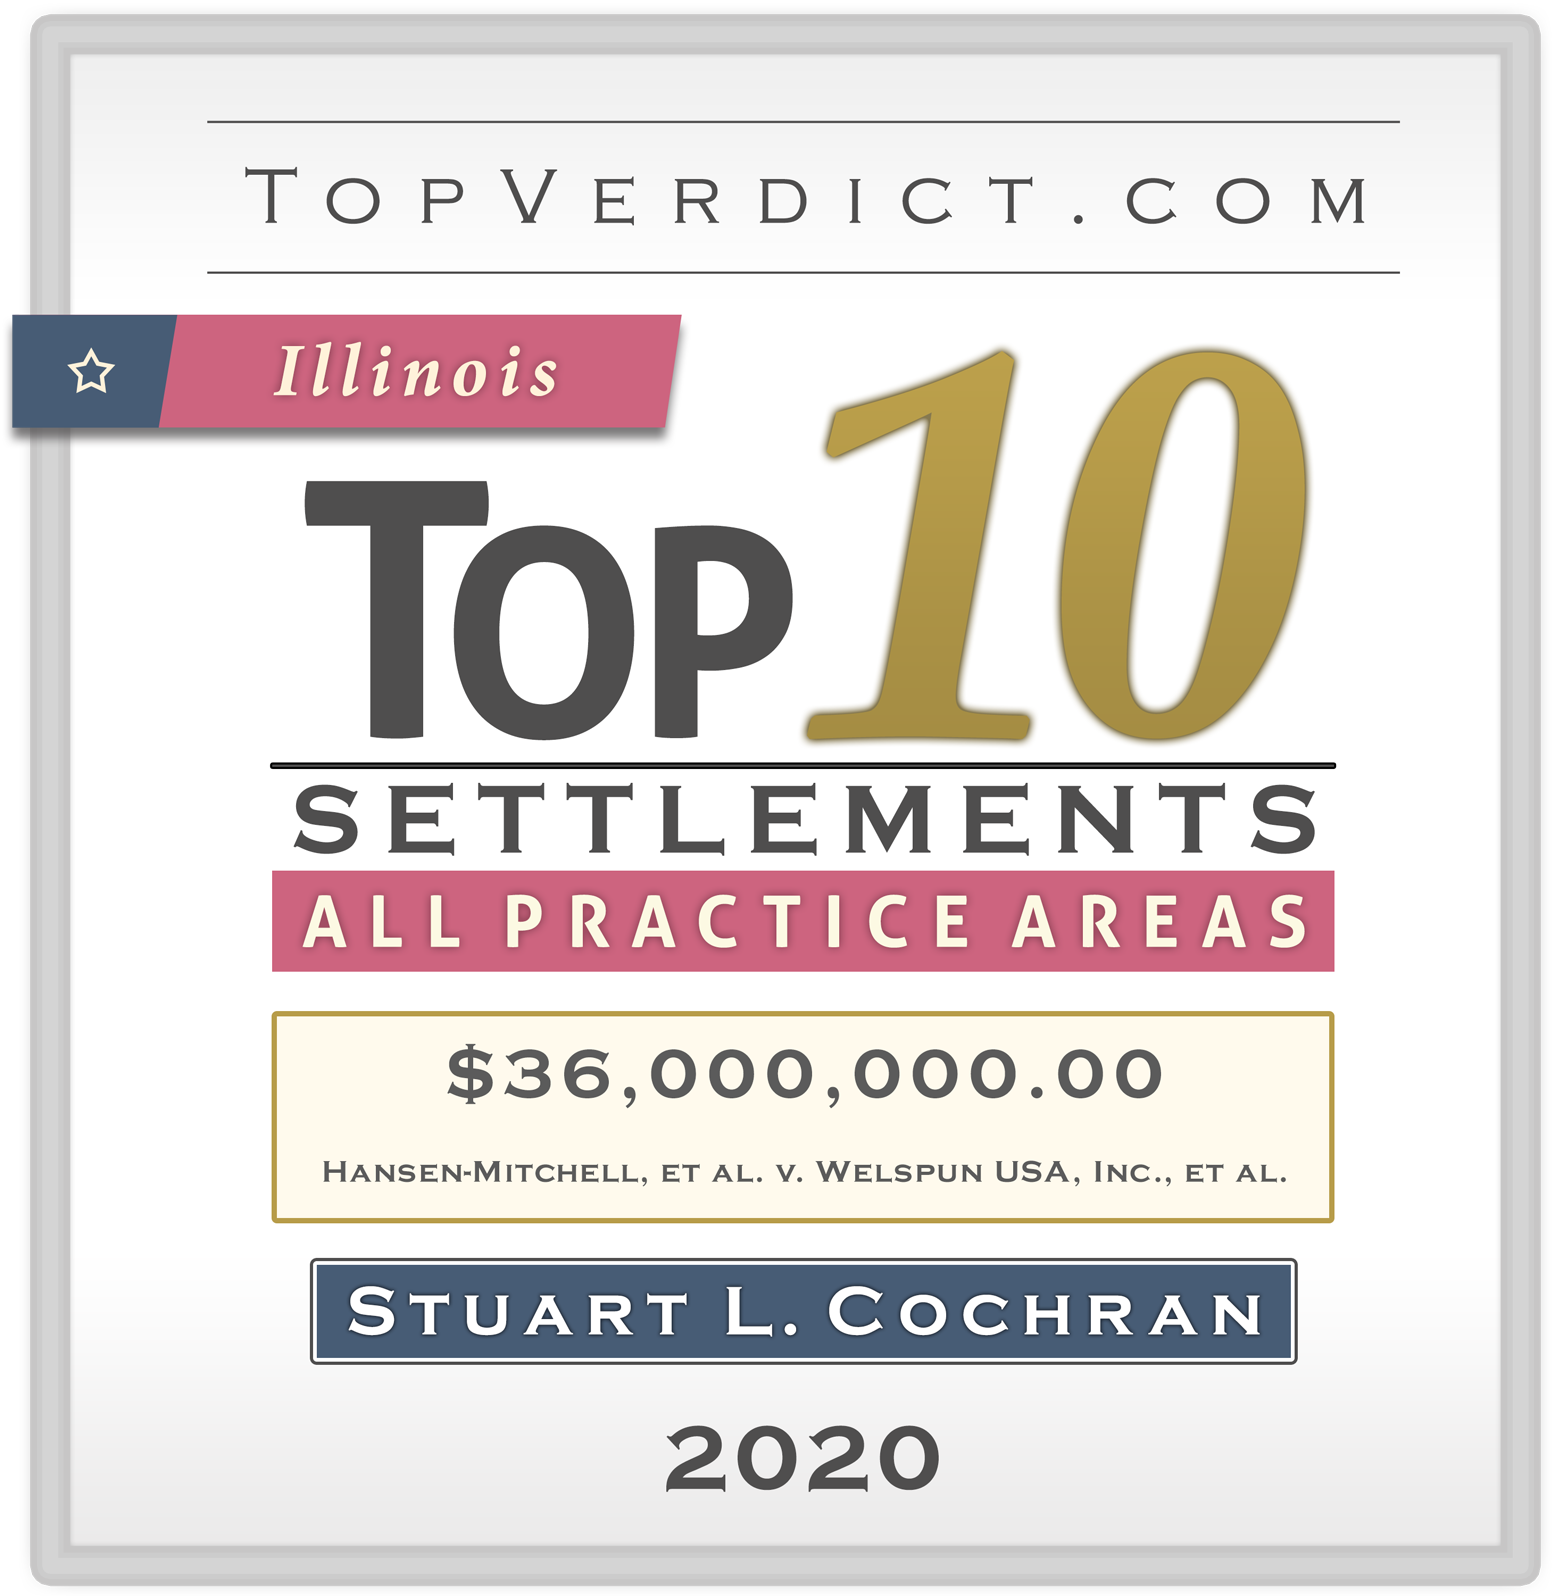 Top 100 Verdicts - TopVerdict.com - Best personal injury lawyer - law office - business lawyer – accident lawyer – Steckler Wayne Cherry & Love Law Firm Dallas Waco East TX